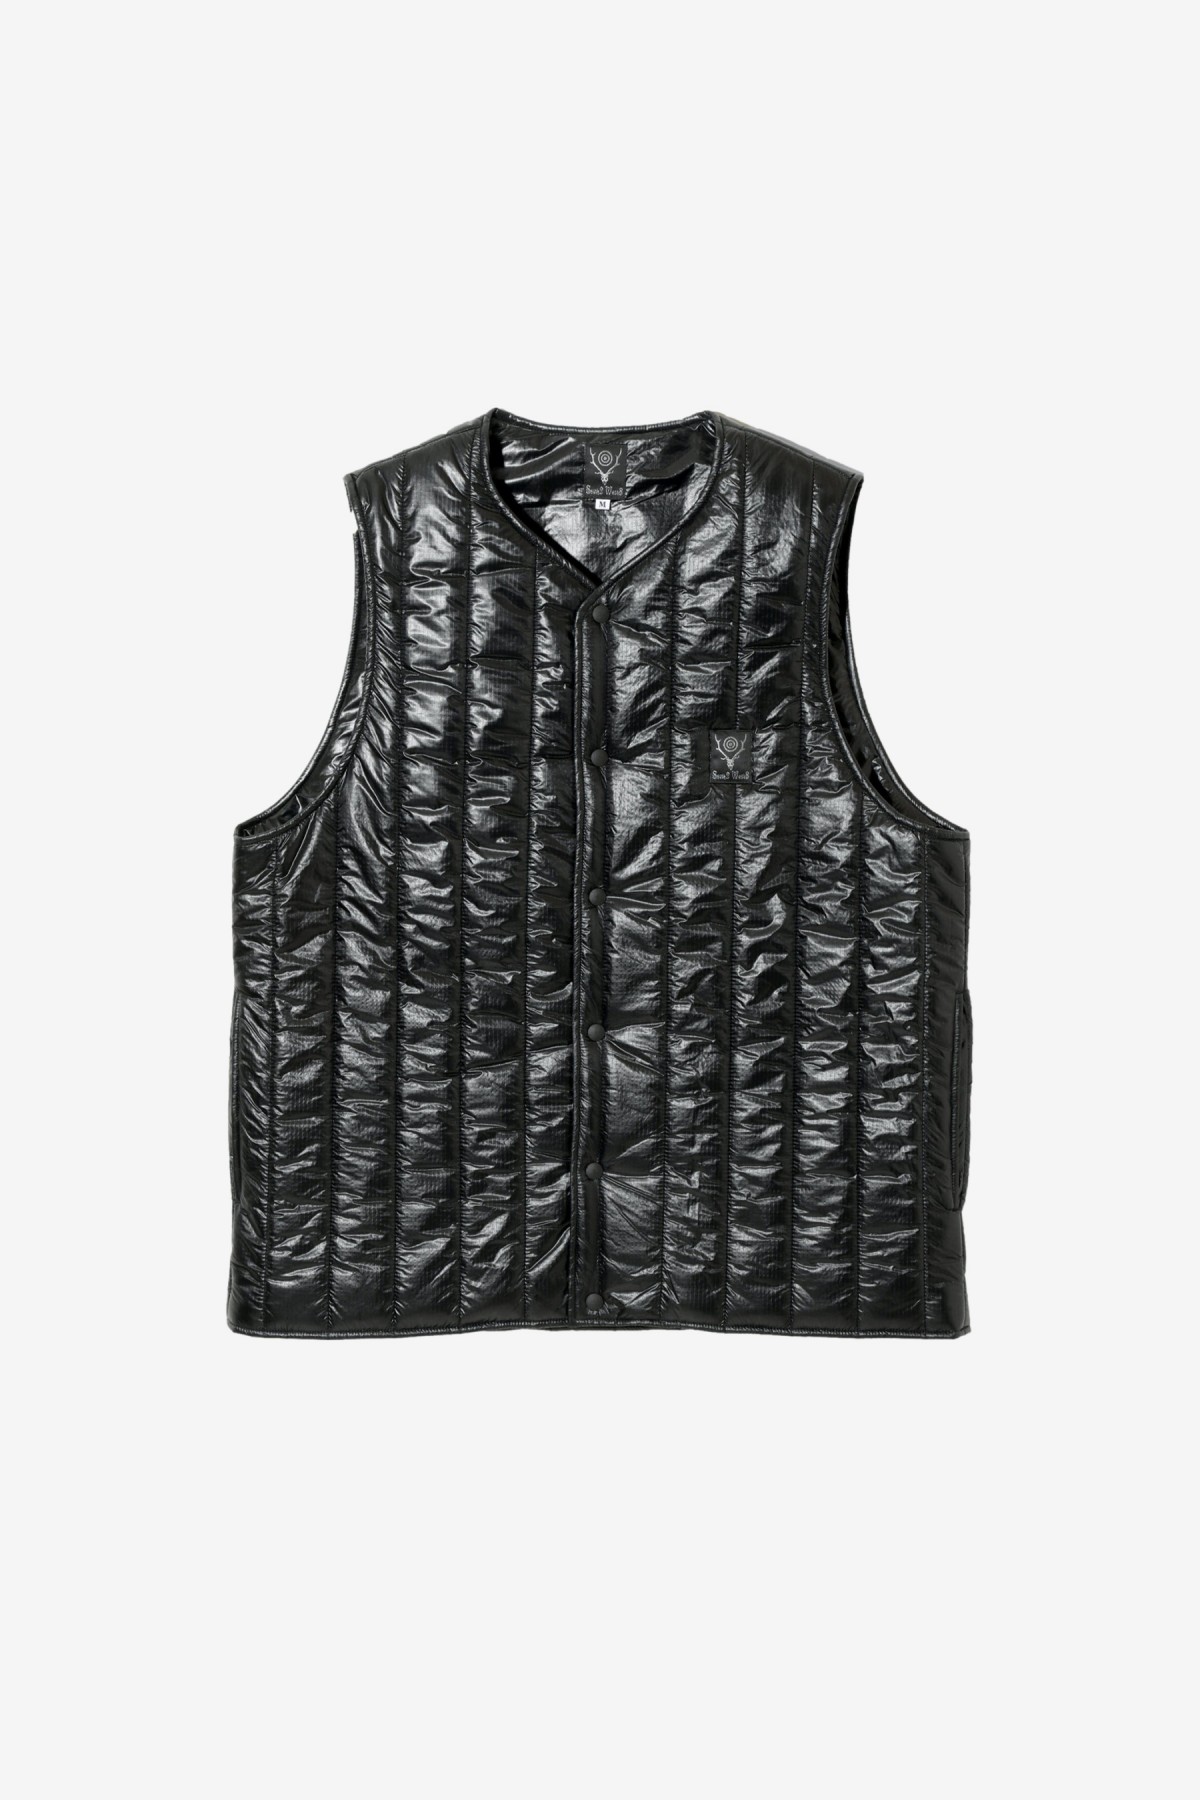 South2 West8 Quilted Crew Neck Vest in Nylon Ripstop Black